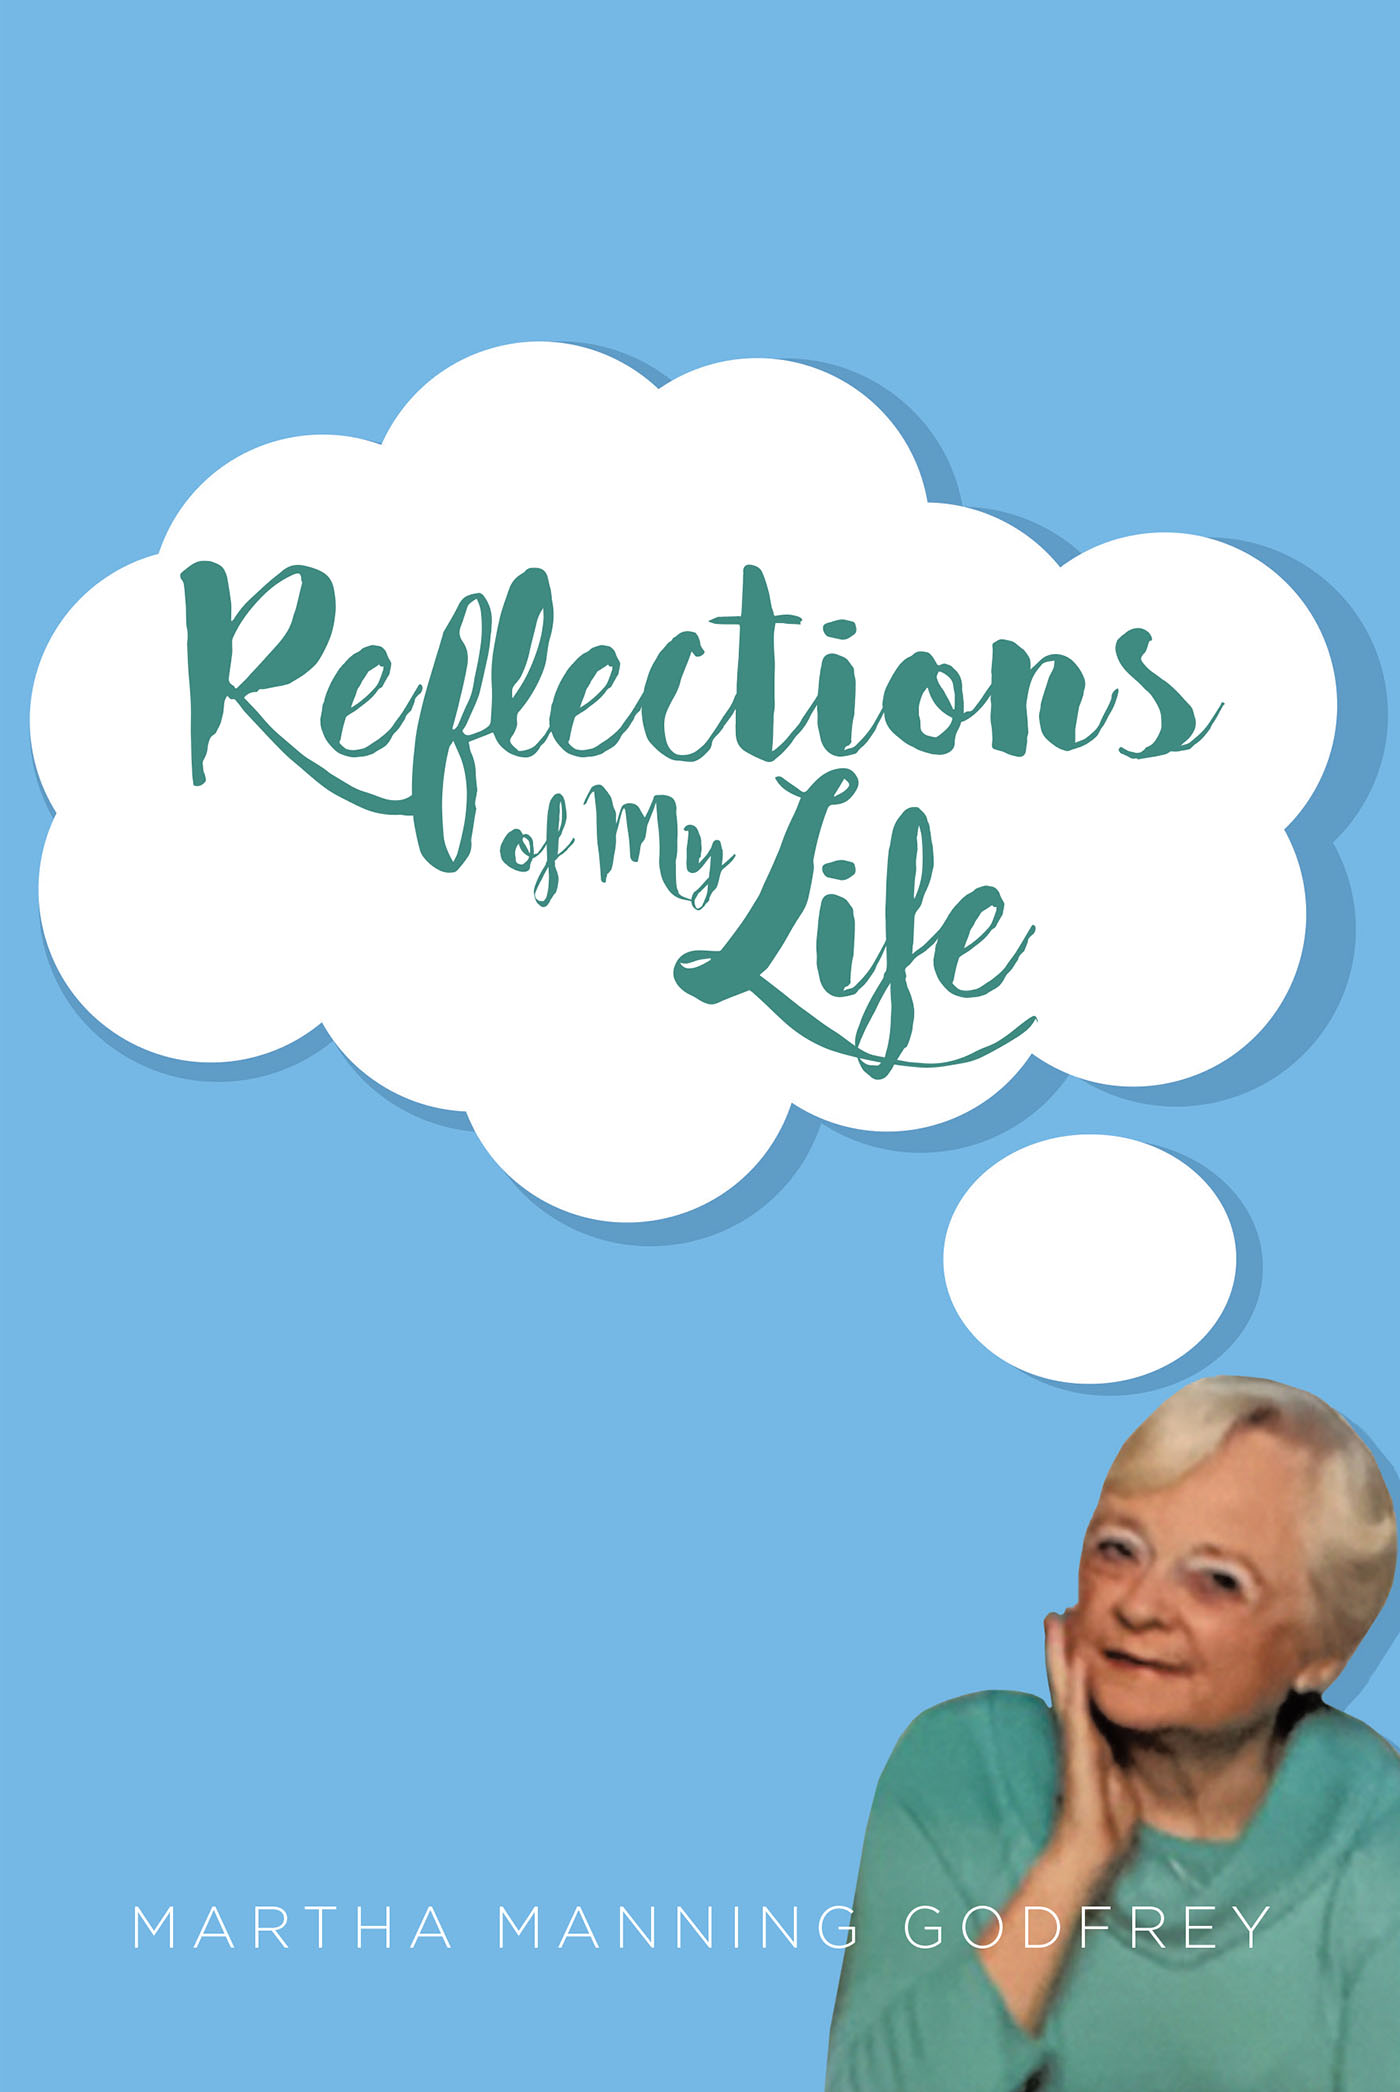 Martha Manning Godfrey’s Newly Released “Reflections of My Life” is a Thoughtful Reflection on Key Moments of Challenge and Blessing